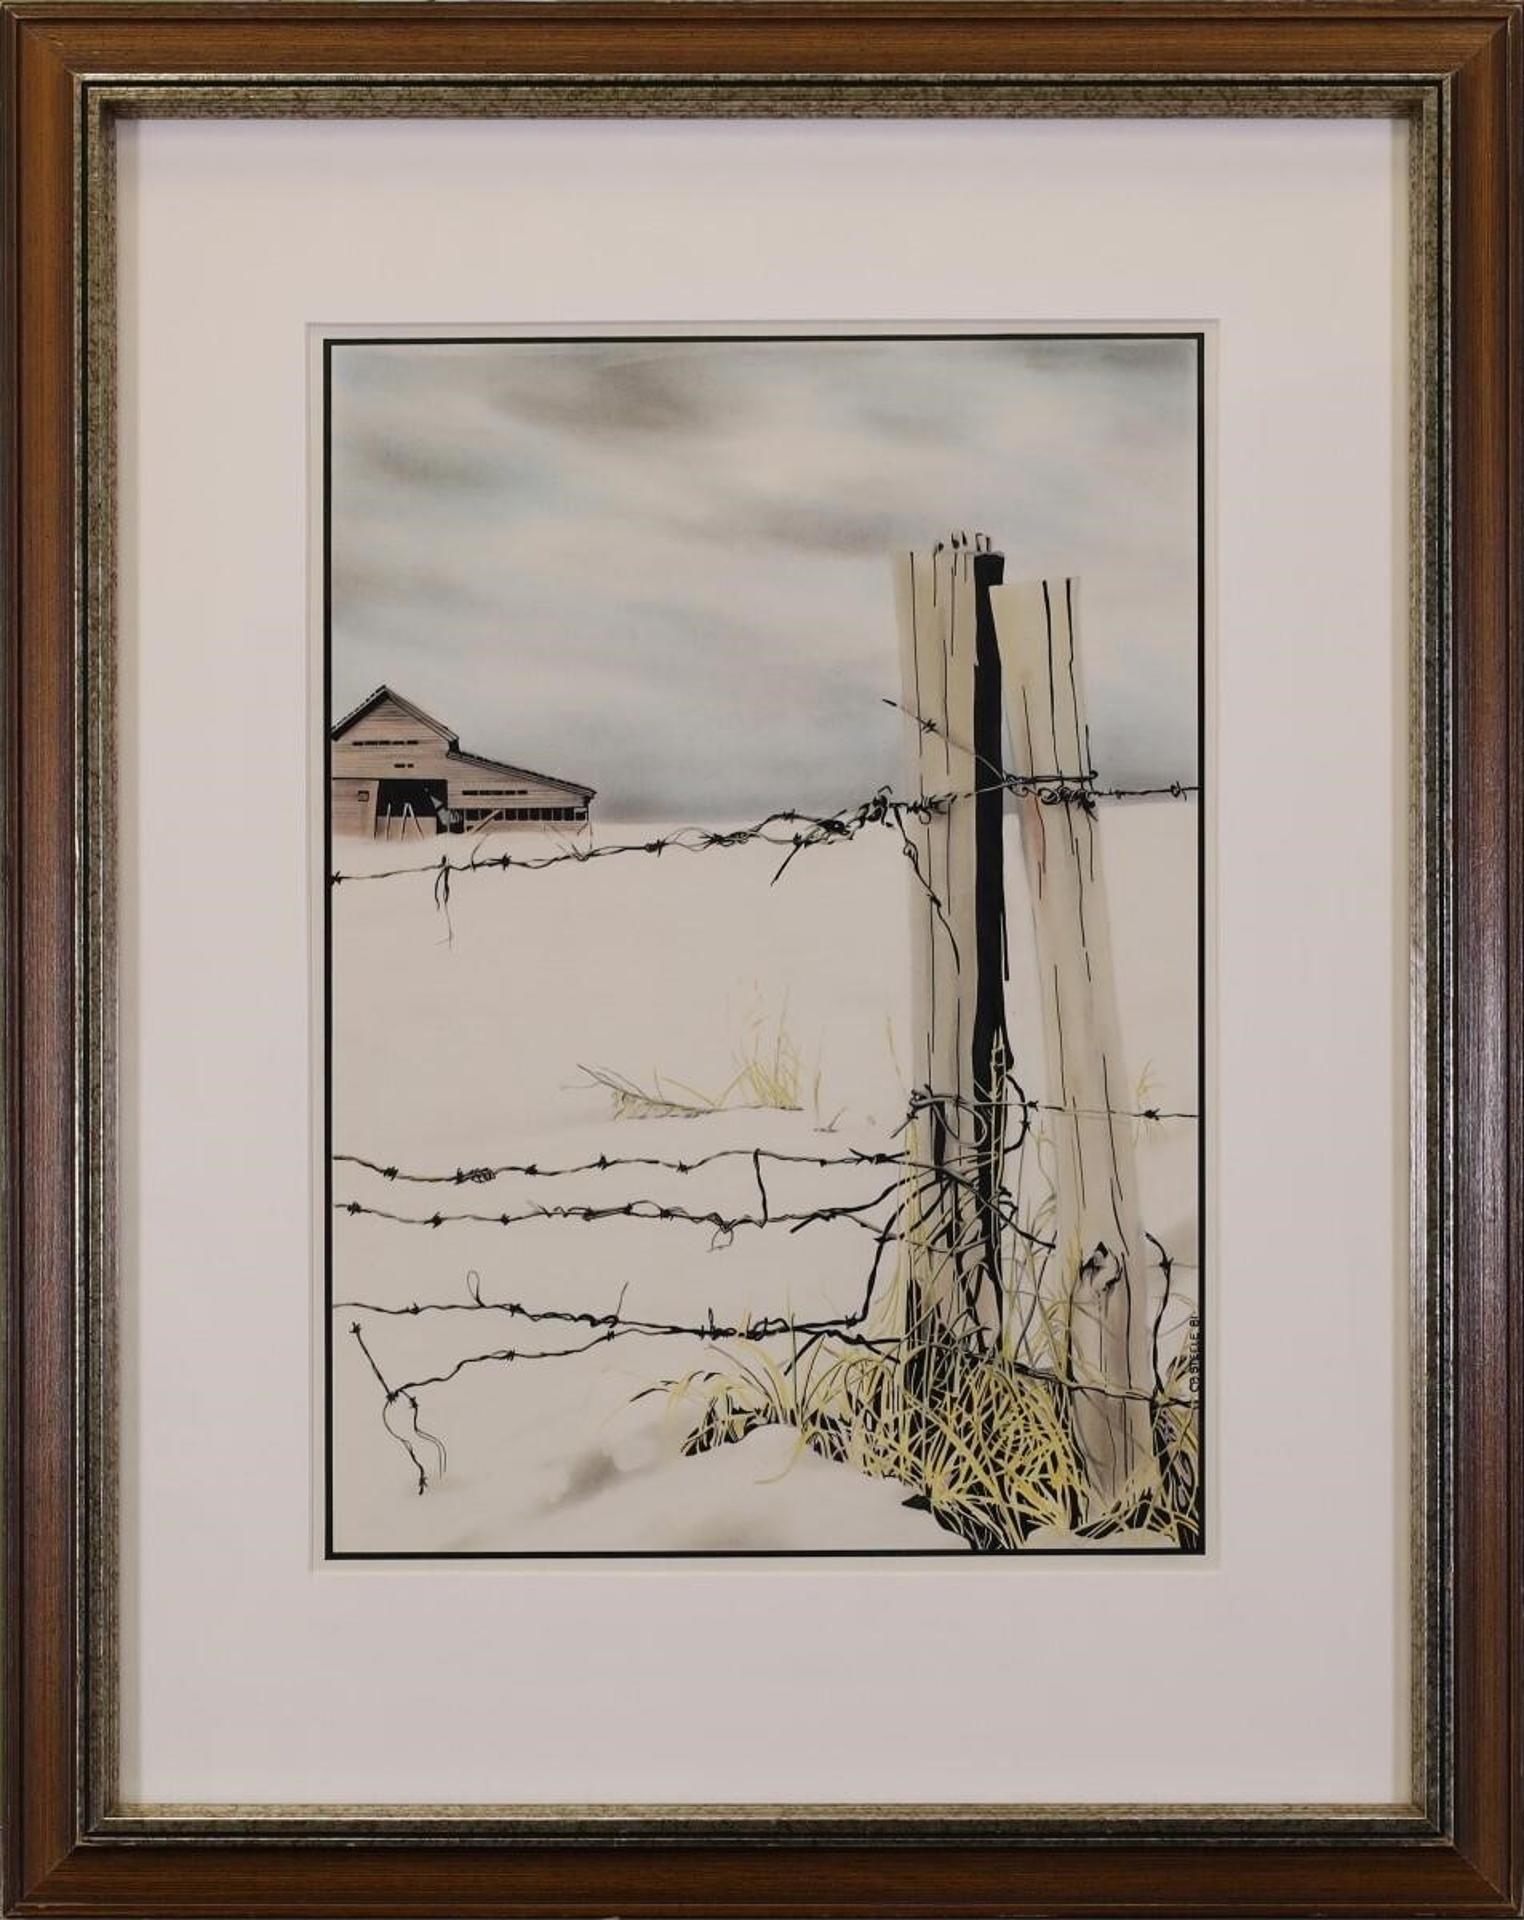 Cameron B. Steele (1954) - Untitled, Farm with Barbed Wire Fence; 1981